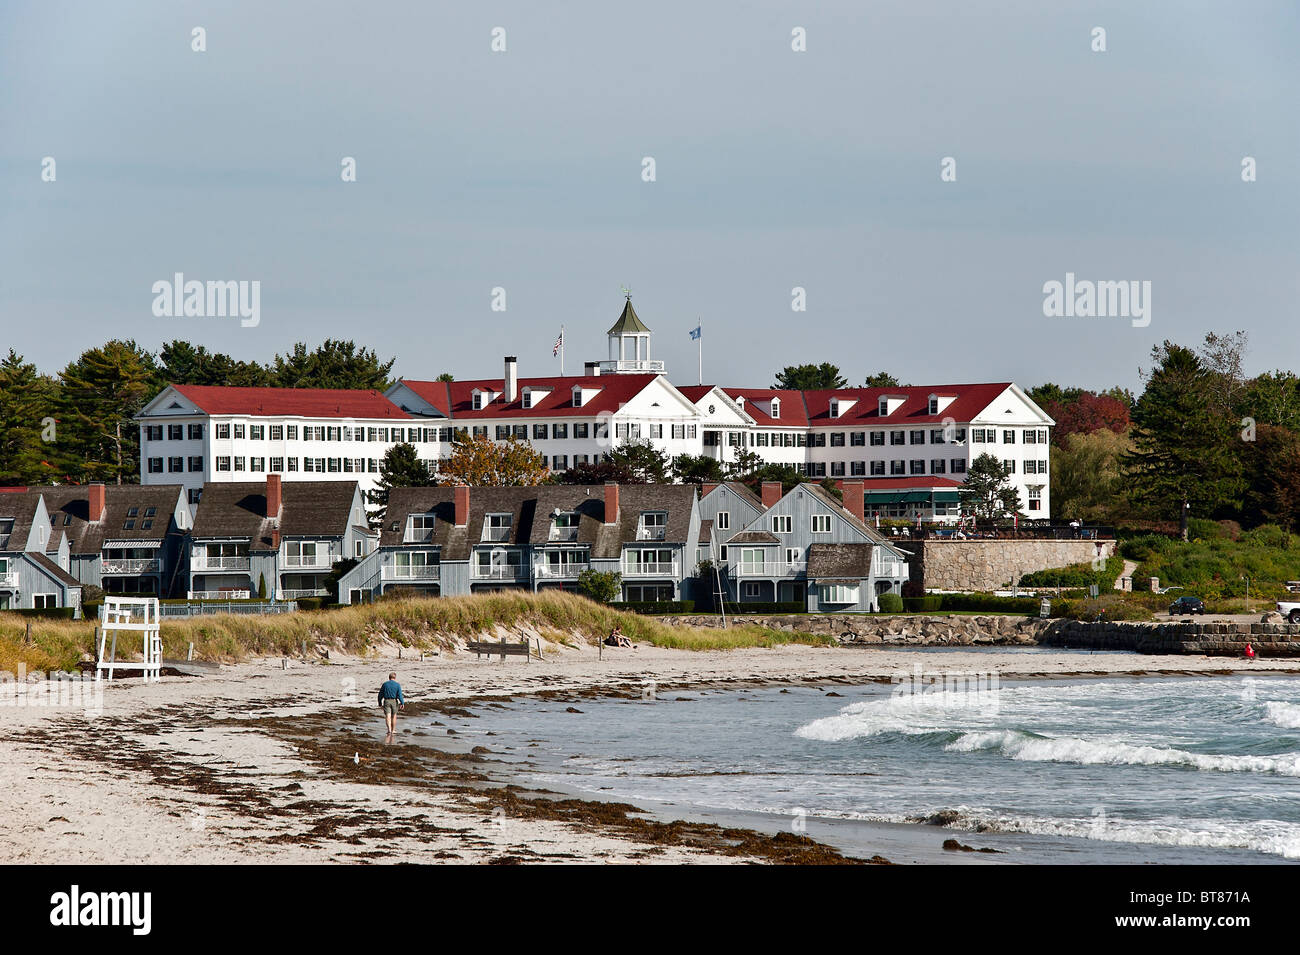 The Colony Hotel, Kennebunkport, Maine Stockfoto